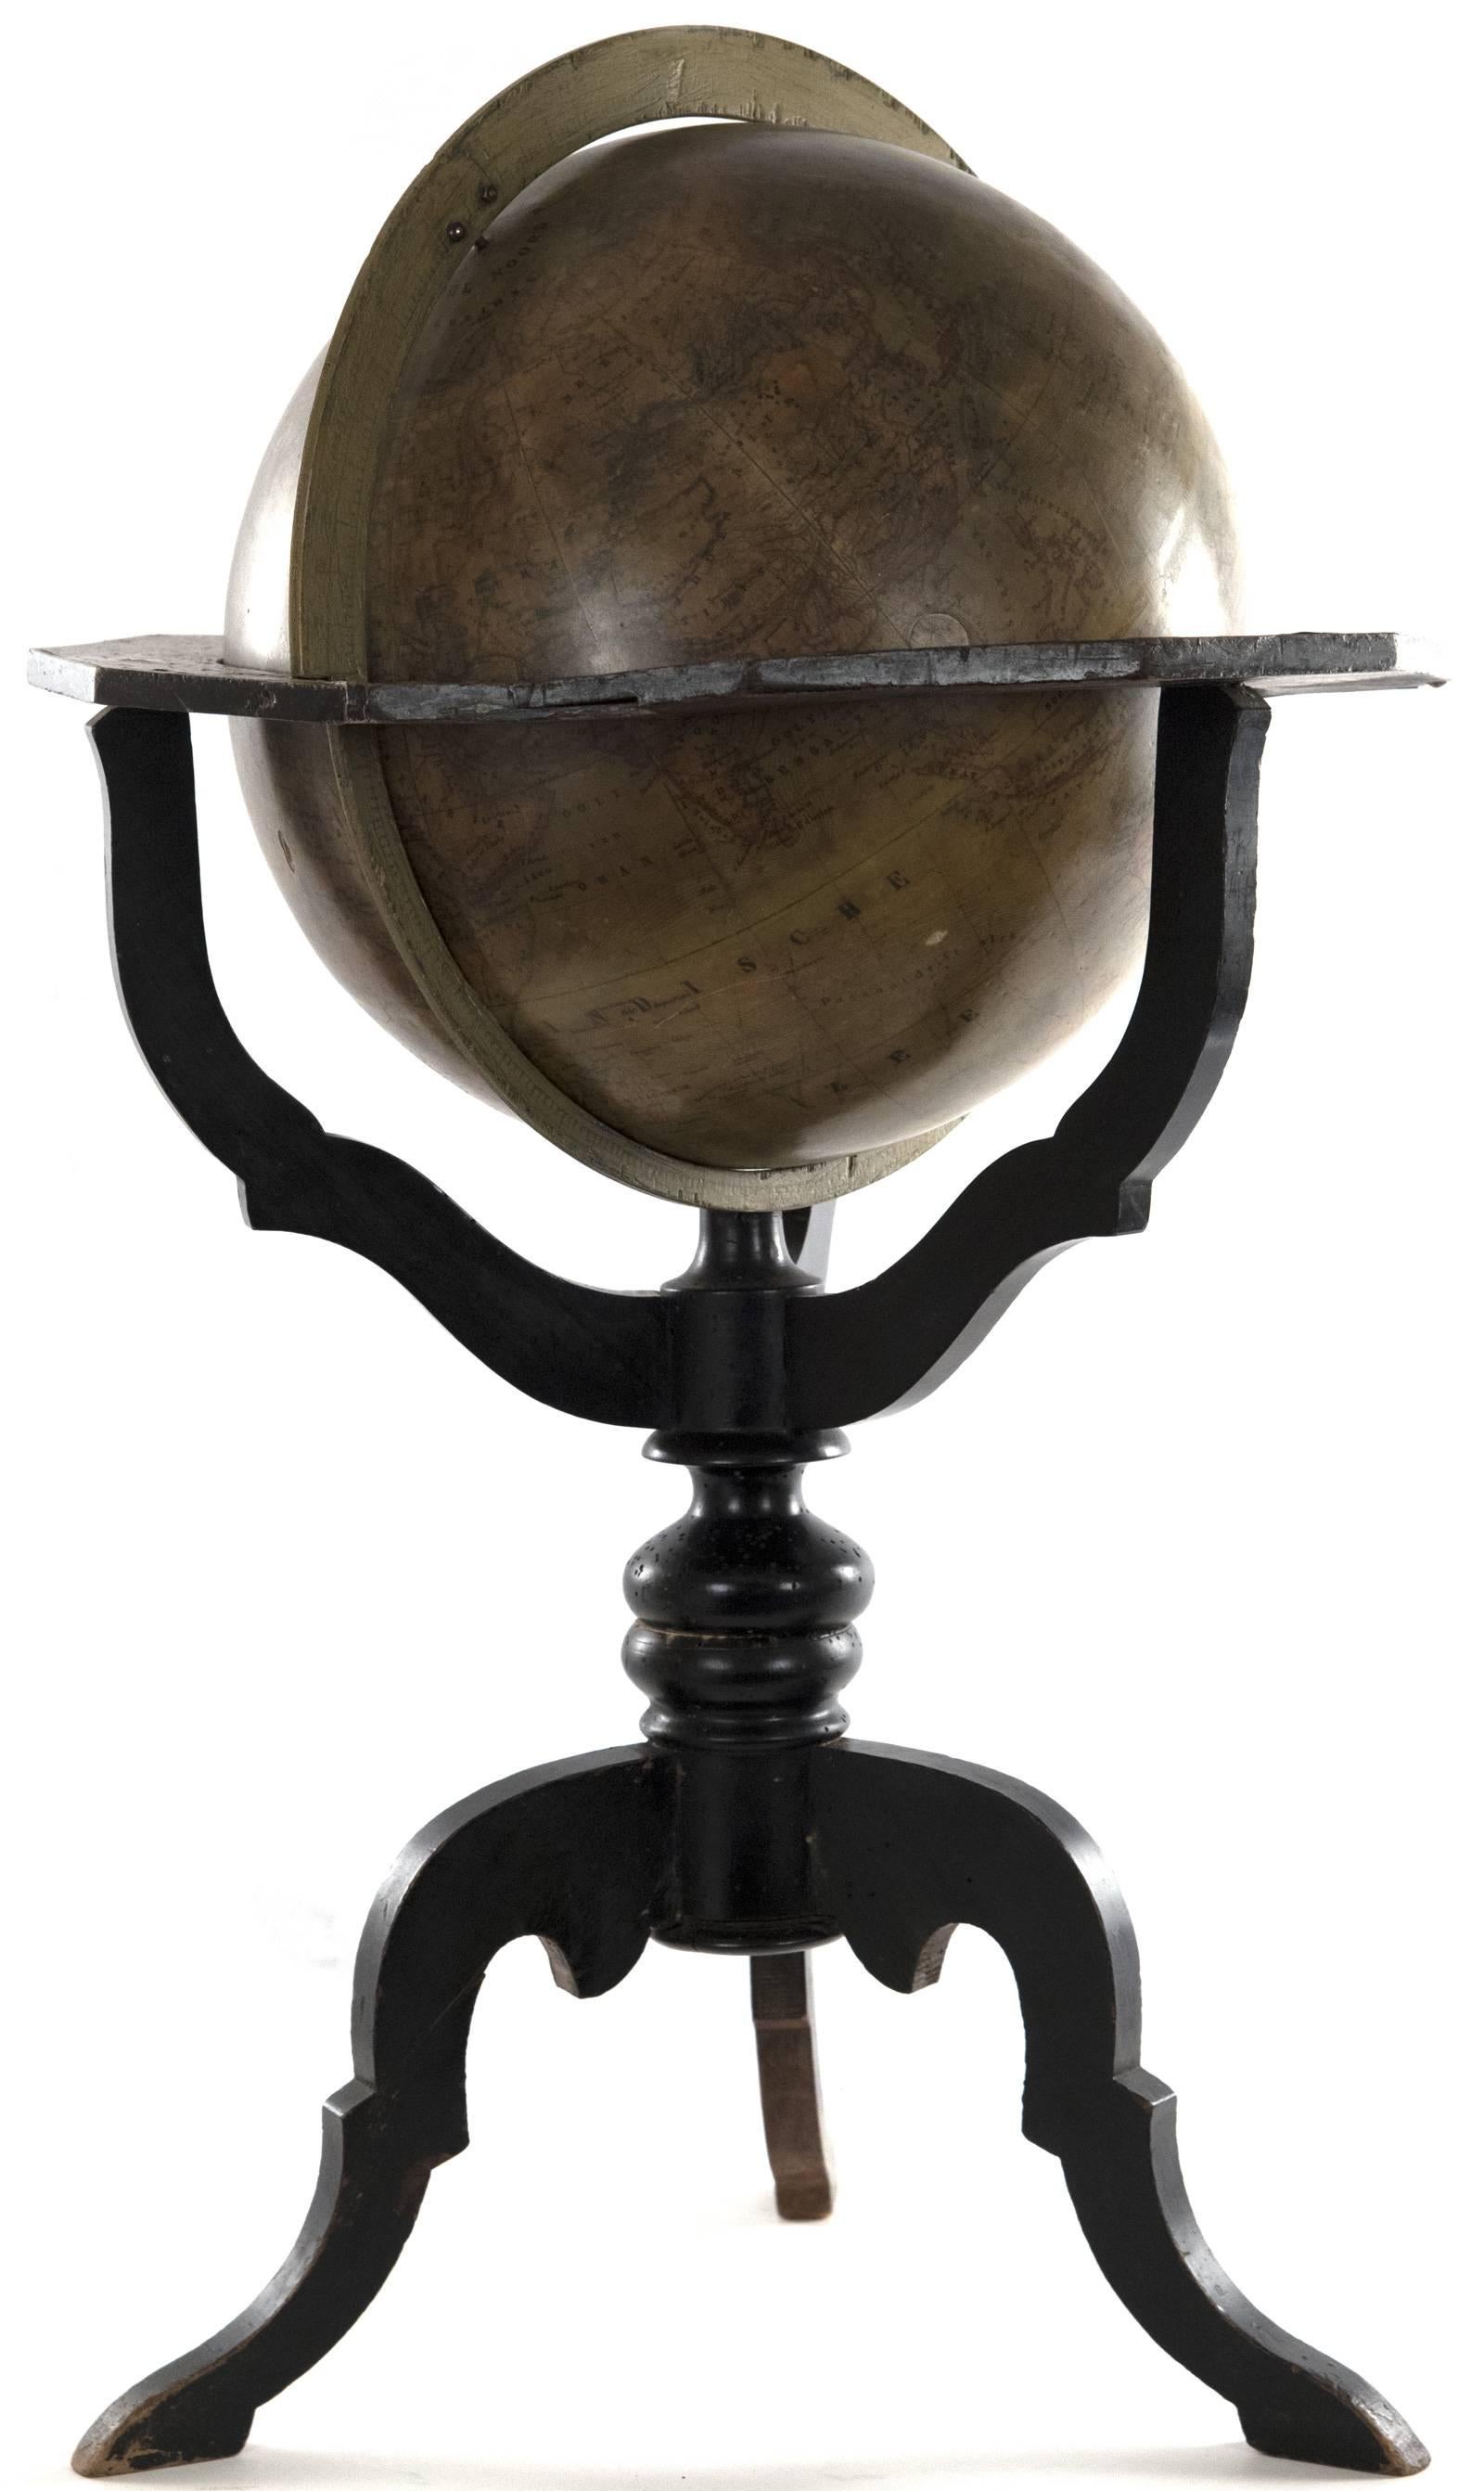 A late 19th century Netherlandish globe with a brass meridian ring and horizontal wooden ring with zodiac, month and compass directions, supported within a wooden turned Stand with tripod base. The globe is papier mâché and annotated in Dutch.